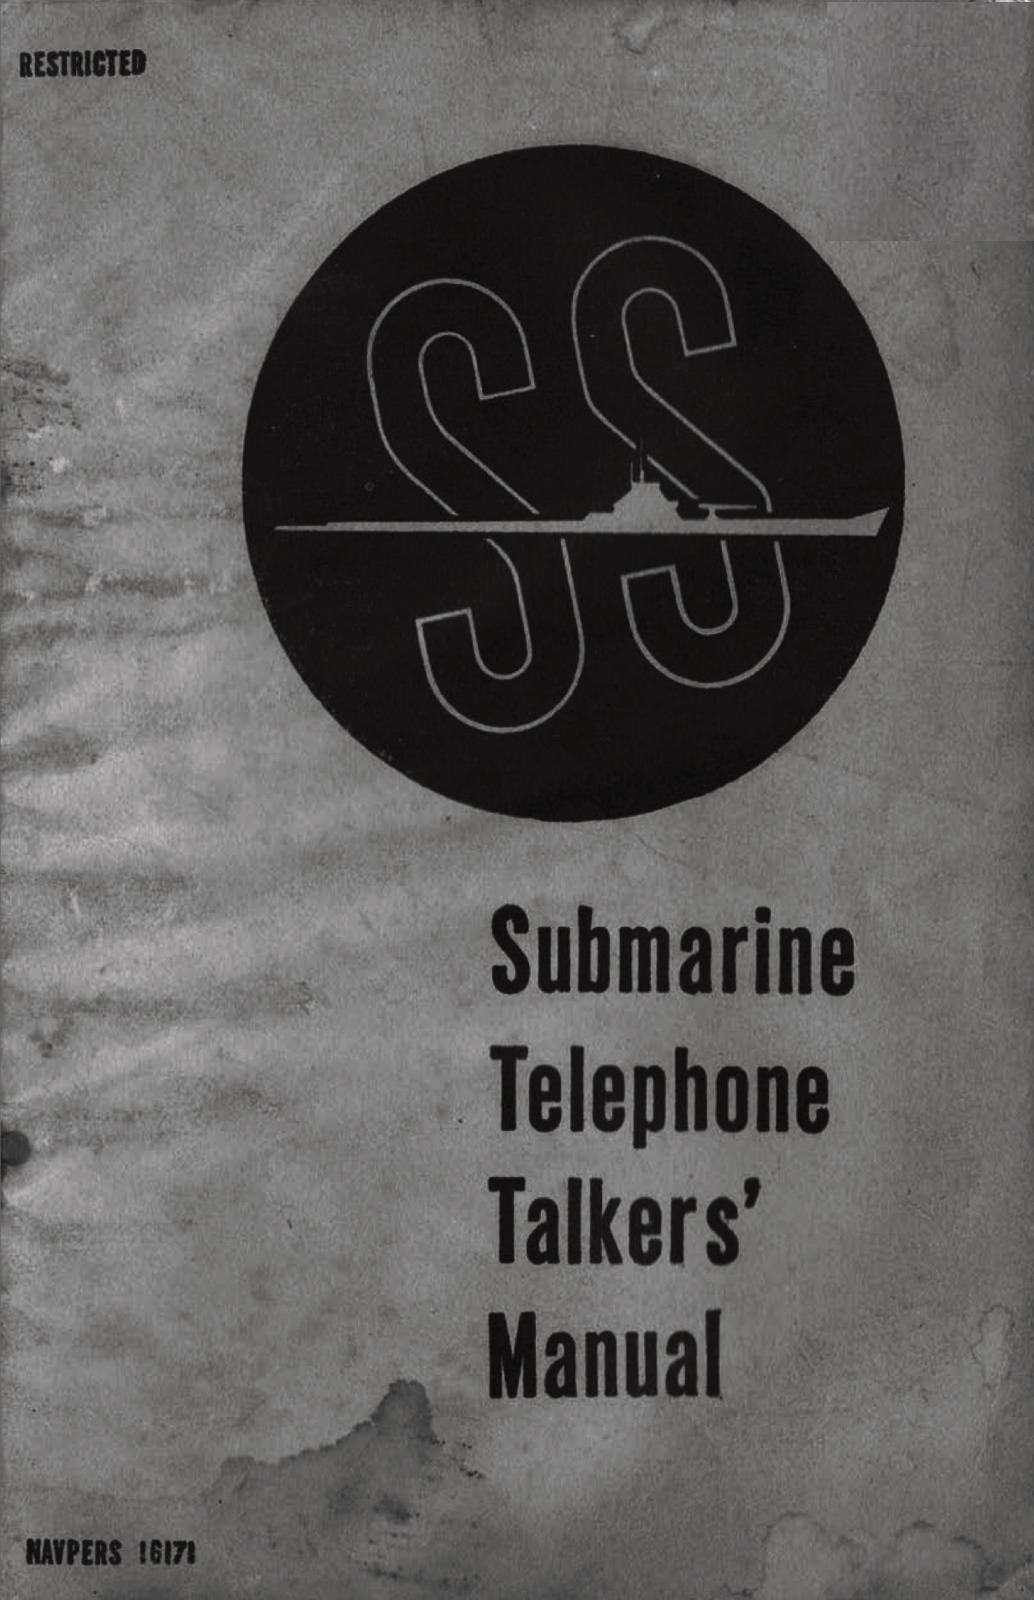 43 Page Dec. 1944 NAVPERS 16171 Submarine Telephone Talkers\' Manual on Data CD